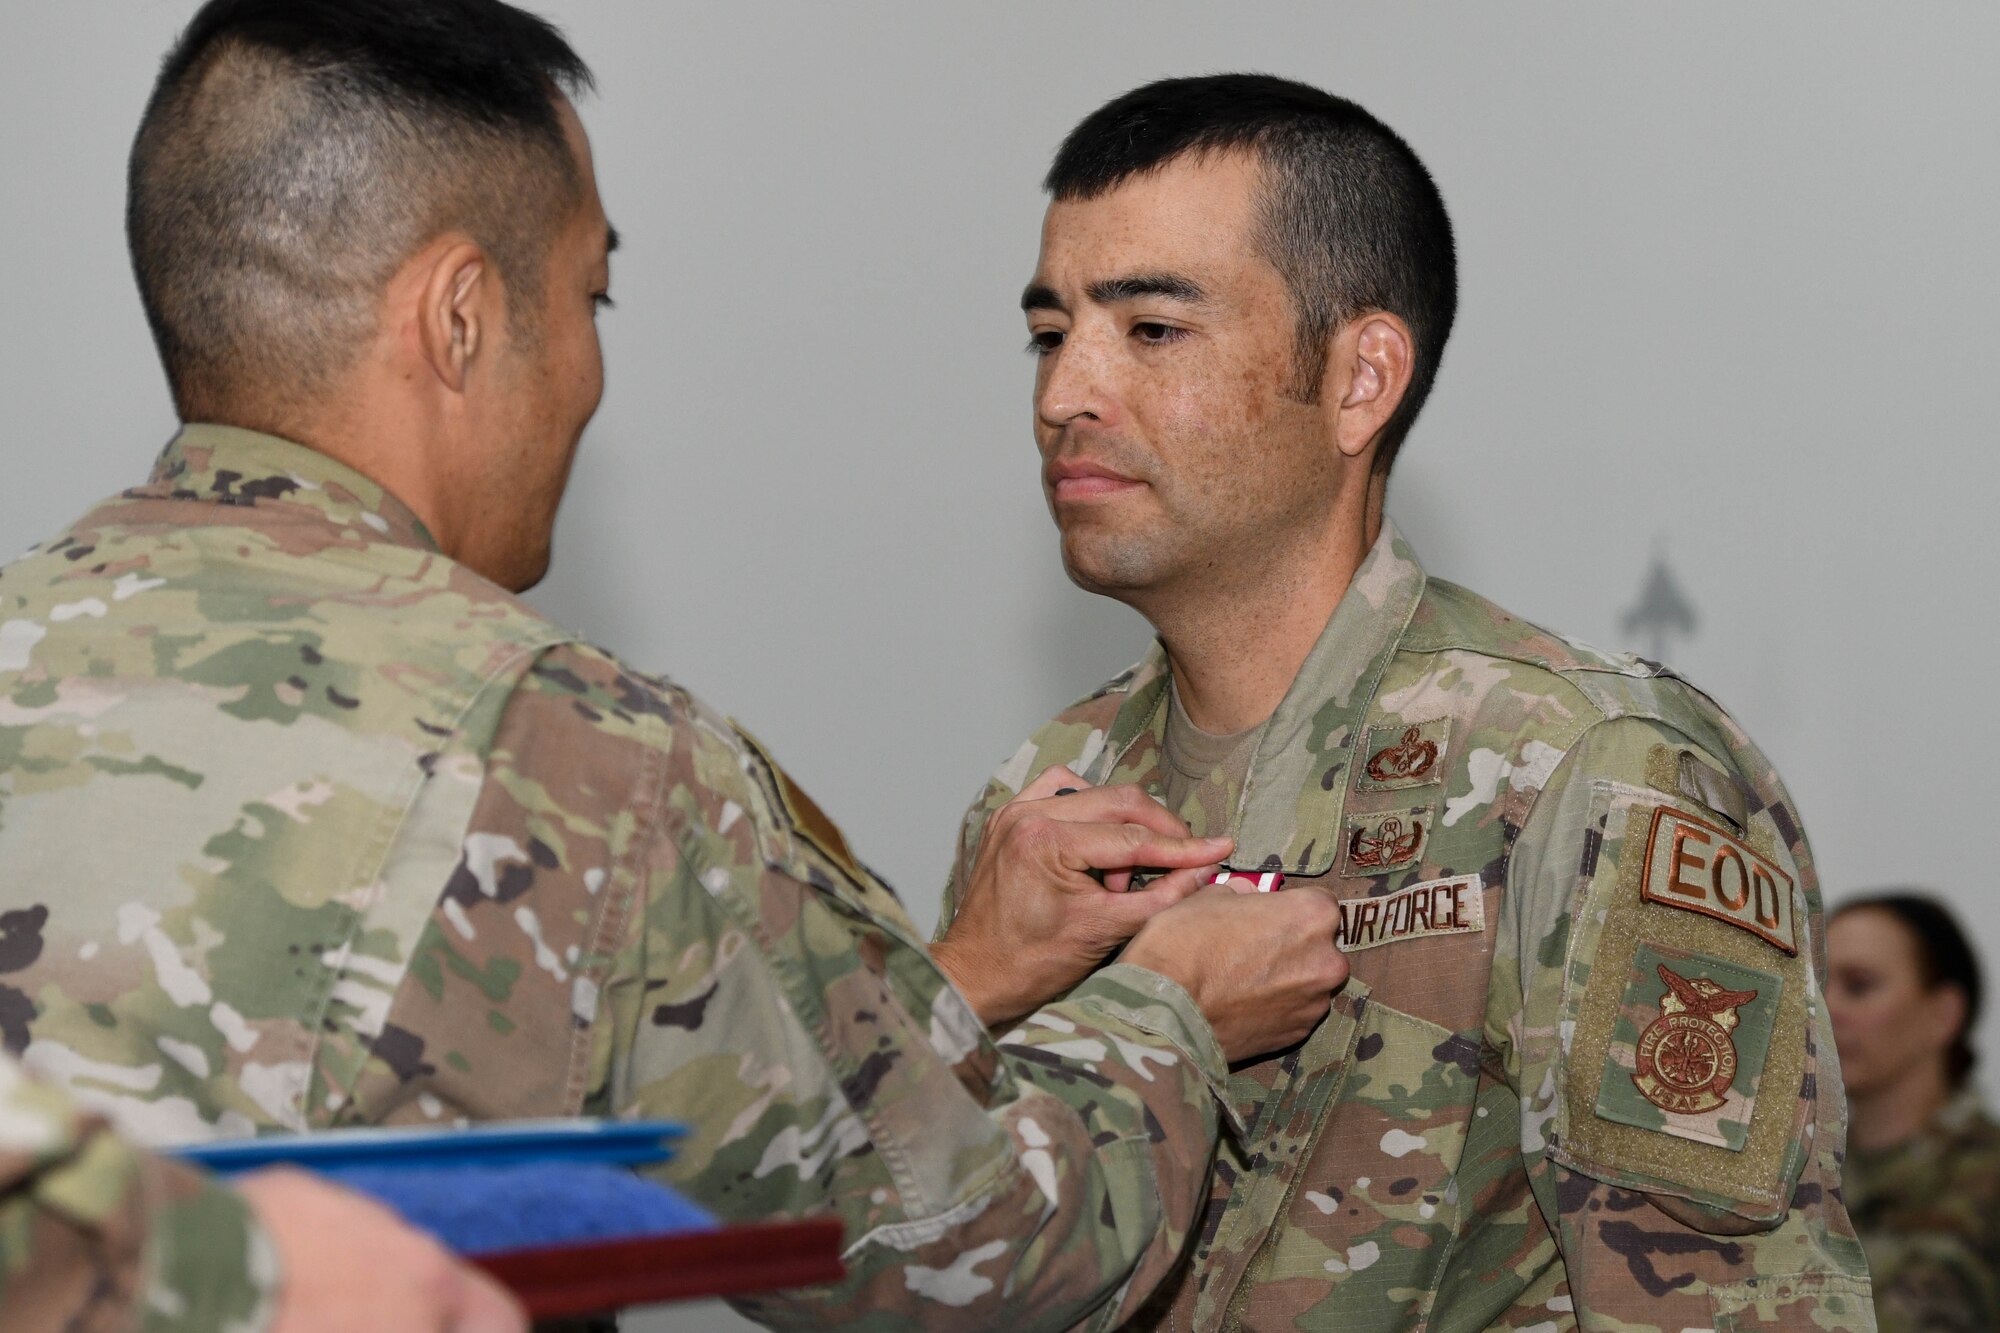 Colonel Todd T. Inouye, the previous 380th Expeditionary Mission Support Group commander and new 380th Air Expeditionary Wing A1/4/6/7 staff director, awards Lt. Col. Brandon Hori, the outgoing commander of the 380th Expeditionary Civil Engineer Squadron, the Meritorious Service Medal during a change of command ceremony, May 20, 2022 at the Phantom Center, Al Dhafra Air Base, United Arab Emirates. Hori led in critical and essential roles at the Wing and squadron levels and served as the wing's emergency operations center director numerous times during exercises and real world emergencies.